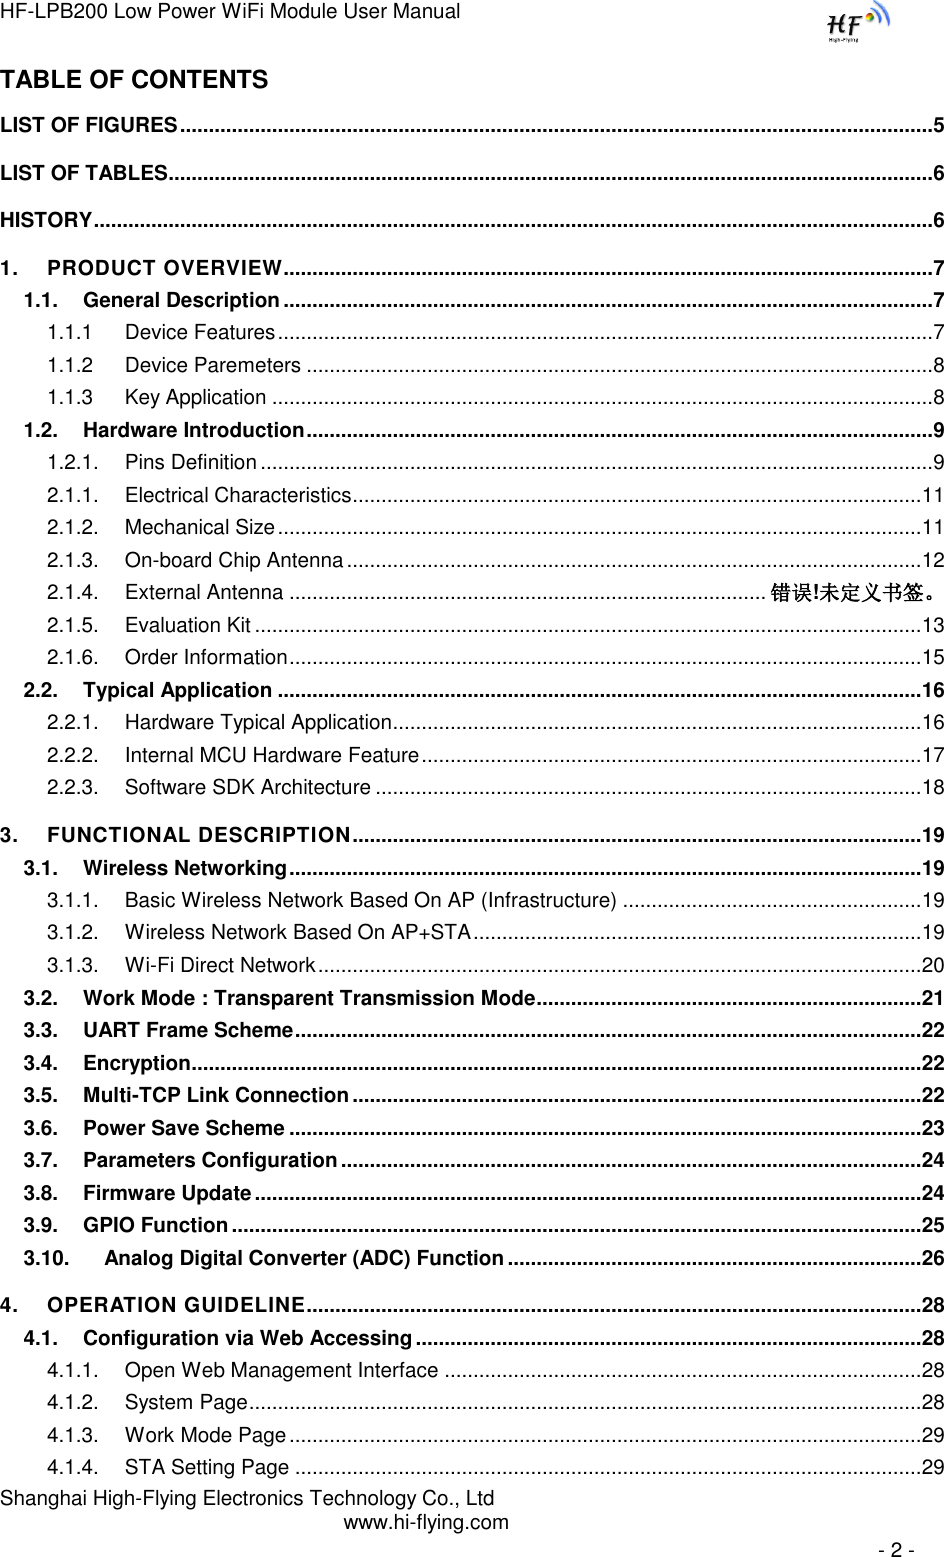 HF-LPB200 Low Power WiFi Module User Manual Shanghai High-Flying Electronics Technology Co., Ltd www.hi-flying.com   - 2 - TABLE OF CONTENTS LIST OF FIGURES ................................................................................................................................... 5 LIST OF TABLES ..................................................................................................................................... 6 HISTORY .................................................................................................................................................. 6 1. PRODUCT OVERVIEW................................................................................................................. 7 1.1. General Description ................................................................................................................. 7 1.1.1 Device Features .................................................................................................................. 7 1.1.2 Device Paremeters ............................................................................................................. 8 1.1.3 Key Application ................................................................................................................... 8 1.2. Hardware Introduction ............................................................................................................. 9 1.2.1. Pins Definition ..................................................................................................................... 9 2.1.1. Electrical Characteristics ................................................................................................... 11 2.1.2. Mechanical Size ................................................................................................................ 11 2.1.3. On-board Chip Antenna .................................................................................................... 12 2.1.4. External Antenna ................................................................................... 错误!未定义书签。 2.1.5. Evaluation Kit .................................................................................................................... 13 2.1.6. Order Information .............................................................................................................. 15 2.2. Typical Application ................................................................................................................ 16 2.2.1. Hardware Typical Application ............................................................................................ 16 2.2.2. Internal MCU Hardware Feature ....................................................................................... 17 2.2.3. Software SDK Architecture ............................................................................................... 18 3. FUNCTIONAL DESCRIPTION ................................................................................................... 19 3.1. Wireless Networking .............................................................................................................. 19 3.1.1. Basic Wireless Network Based On AP (Infrastructure) .................................................... 19 3.1.2. Wireless Network Based On AP+STA .............................................................................. 19 3.1.3. Wi-Fi Direct Network ......................................................................................................... 20 3.2. Work Mode : Transparent Transmission Mode ................................................................... 21 3.3. UART Frame Scheme ............................................................................................................. 22 3.4. Encryption............................................................................................................................... 22 3.5. Multi-TCP Link Connection ................................................................................................... 22 3.6. Power Save Scheme .............................................................................................................. 23 3.7. Parameters Configuration ..................................................................................................... 24 3.8. Firmware Update .................................................................................................................... 24 3.9. GPIO Function ........................................................................................................................ 25 3.10. Analog Digital Converter (ADC) Function ........................................................................ 26 4. OPERATION GUIDELINE........................................................................................................... 28 4.1. Configuration via Web Accessing ........................................................................................ 28 4.1.1. Open Web Management Interface ................................................................................... 28 4.1.2. System Page ..................................................................................................................... 28 4.1.3. Work Mode Page .............................................................................................................. 29 4.1.4. STA Setting Page ............................................................................................................. 29 